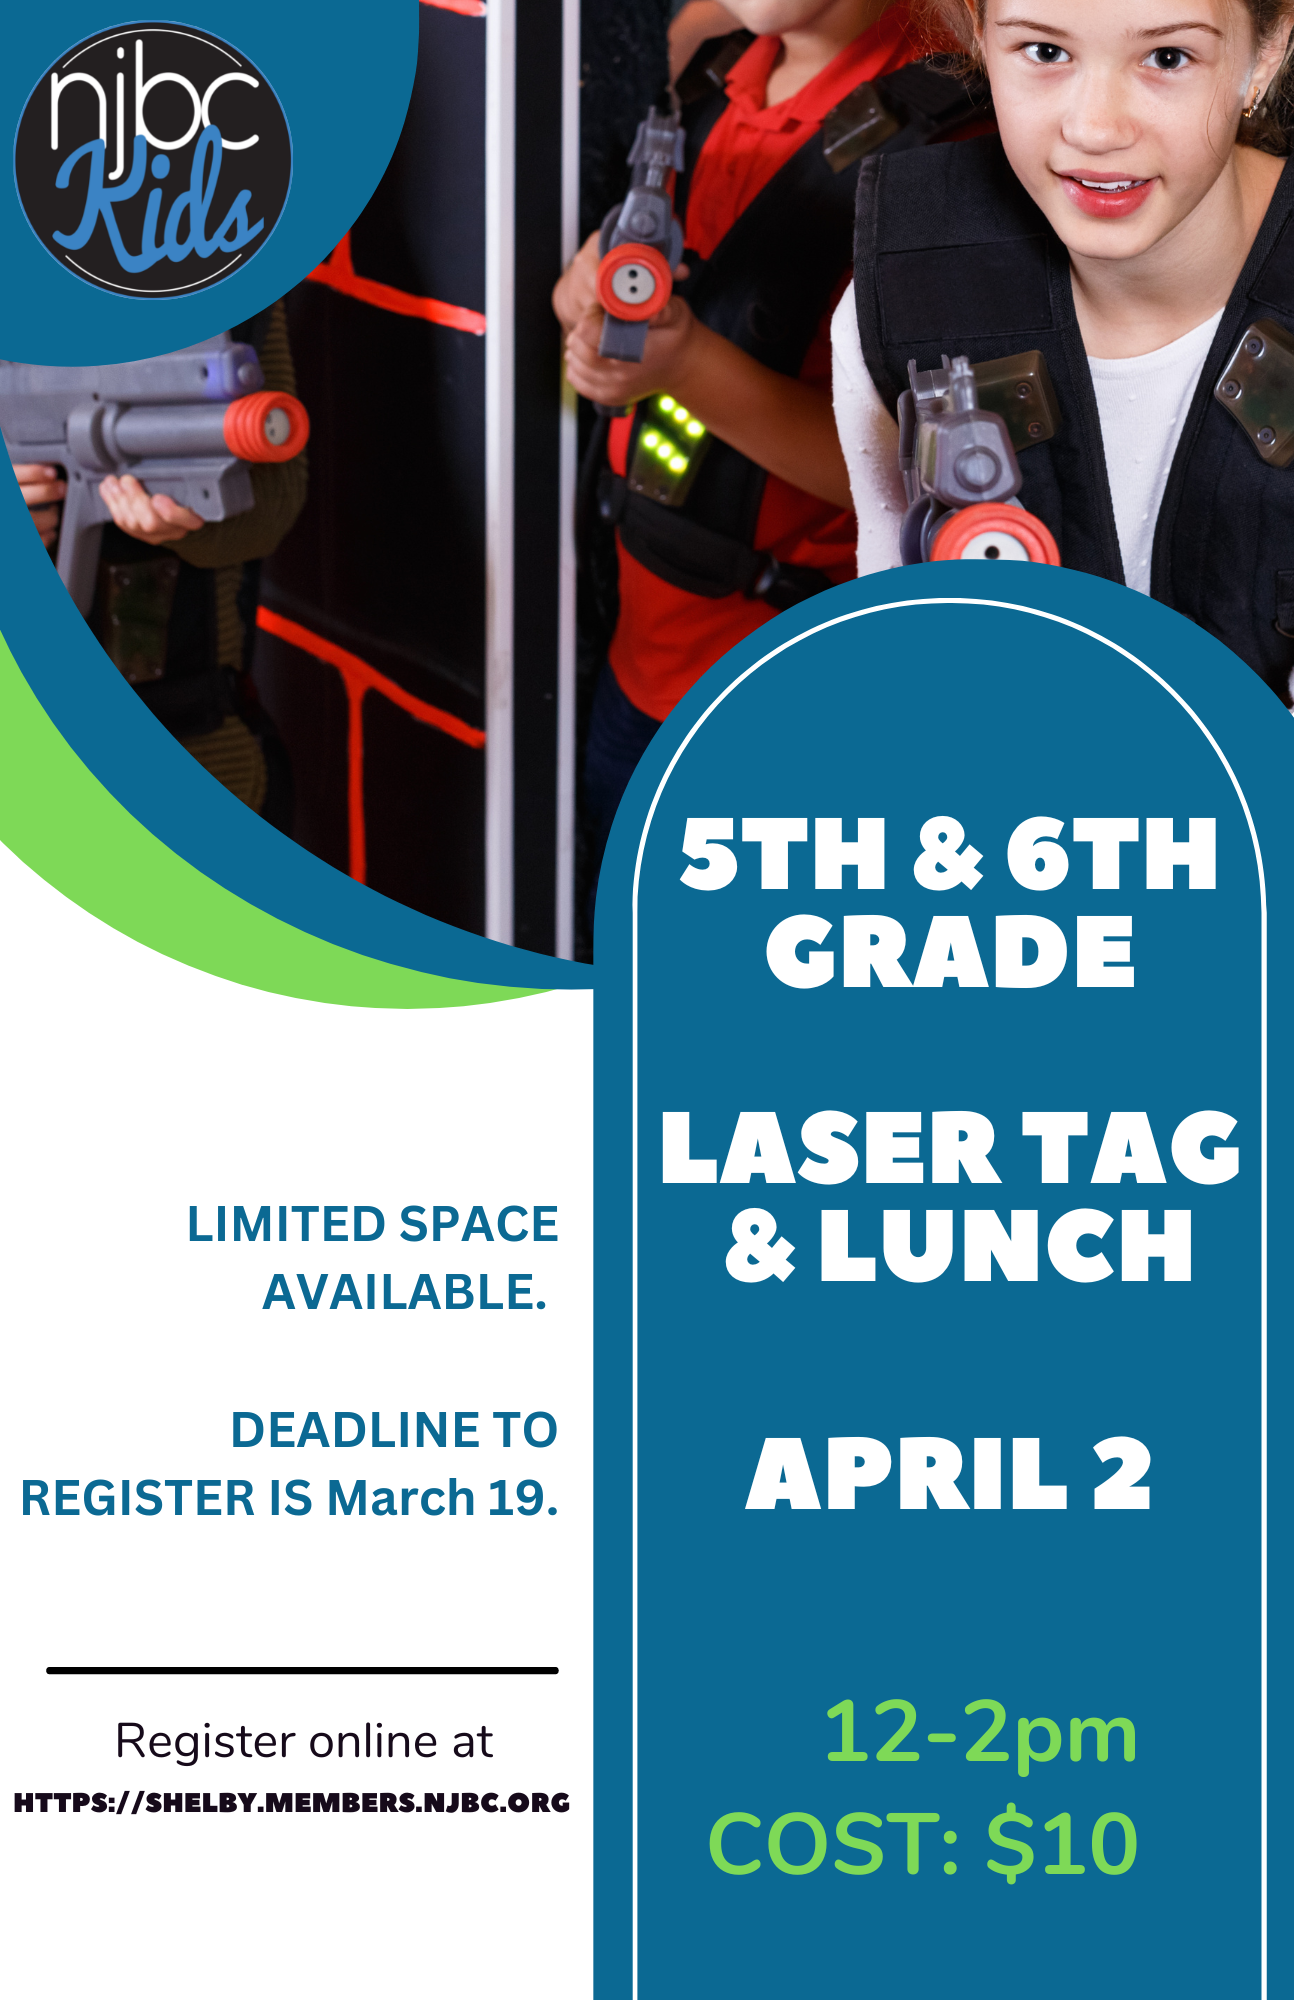 5th & 6th Grade Laser Tag and Lunch April 2